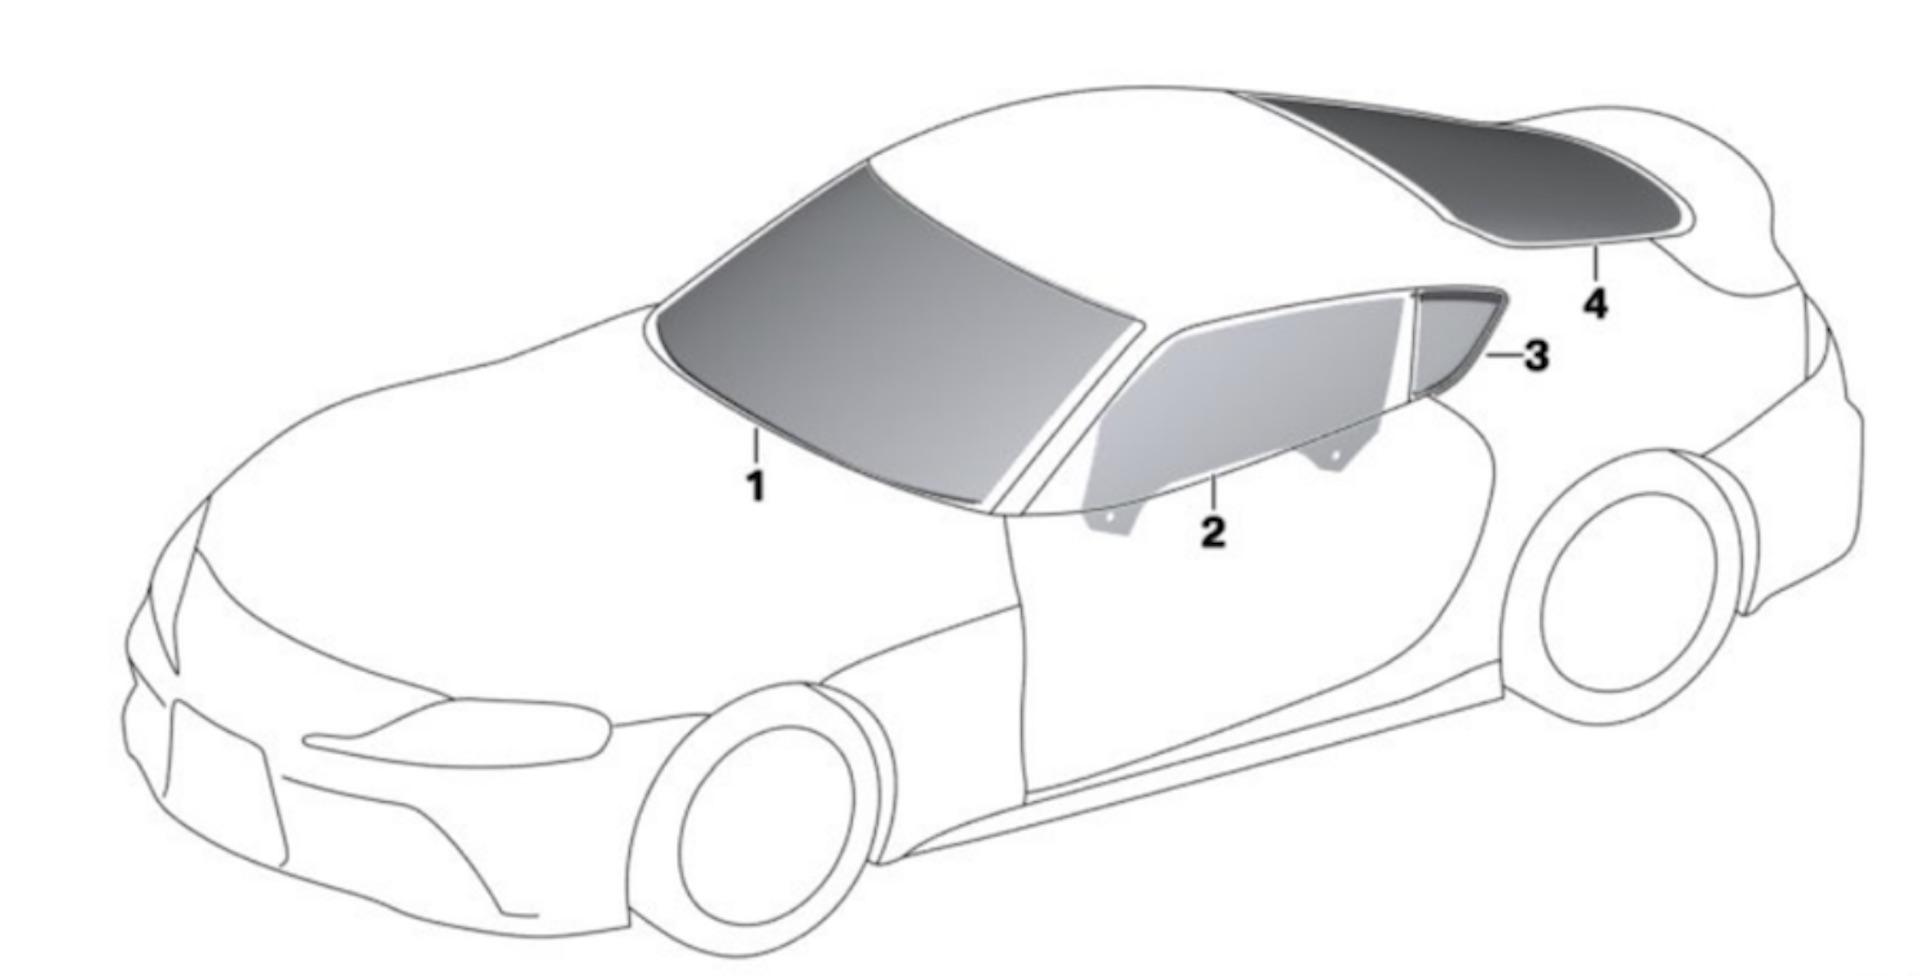 Learn 92+ about toyota supra drawing super cool - in.daotaonec